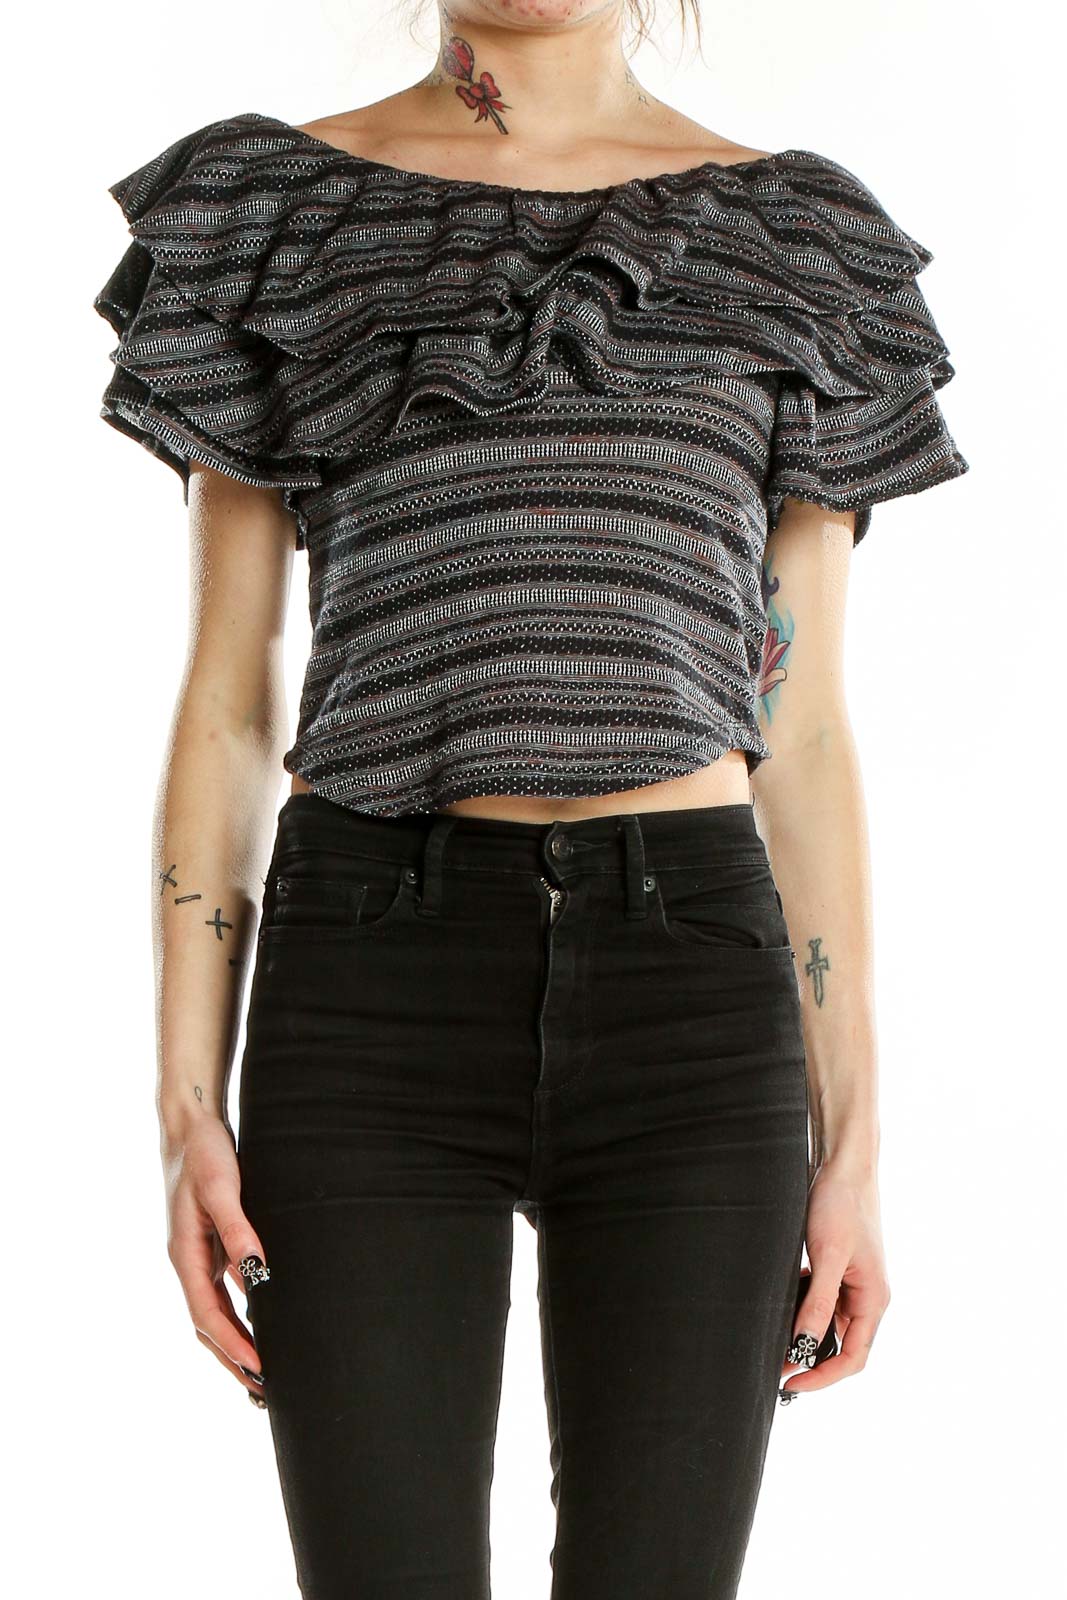 Gray Cropped Off The Shoulder Top Front